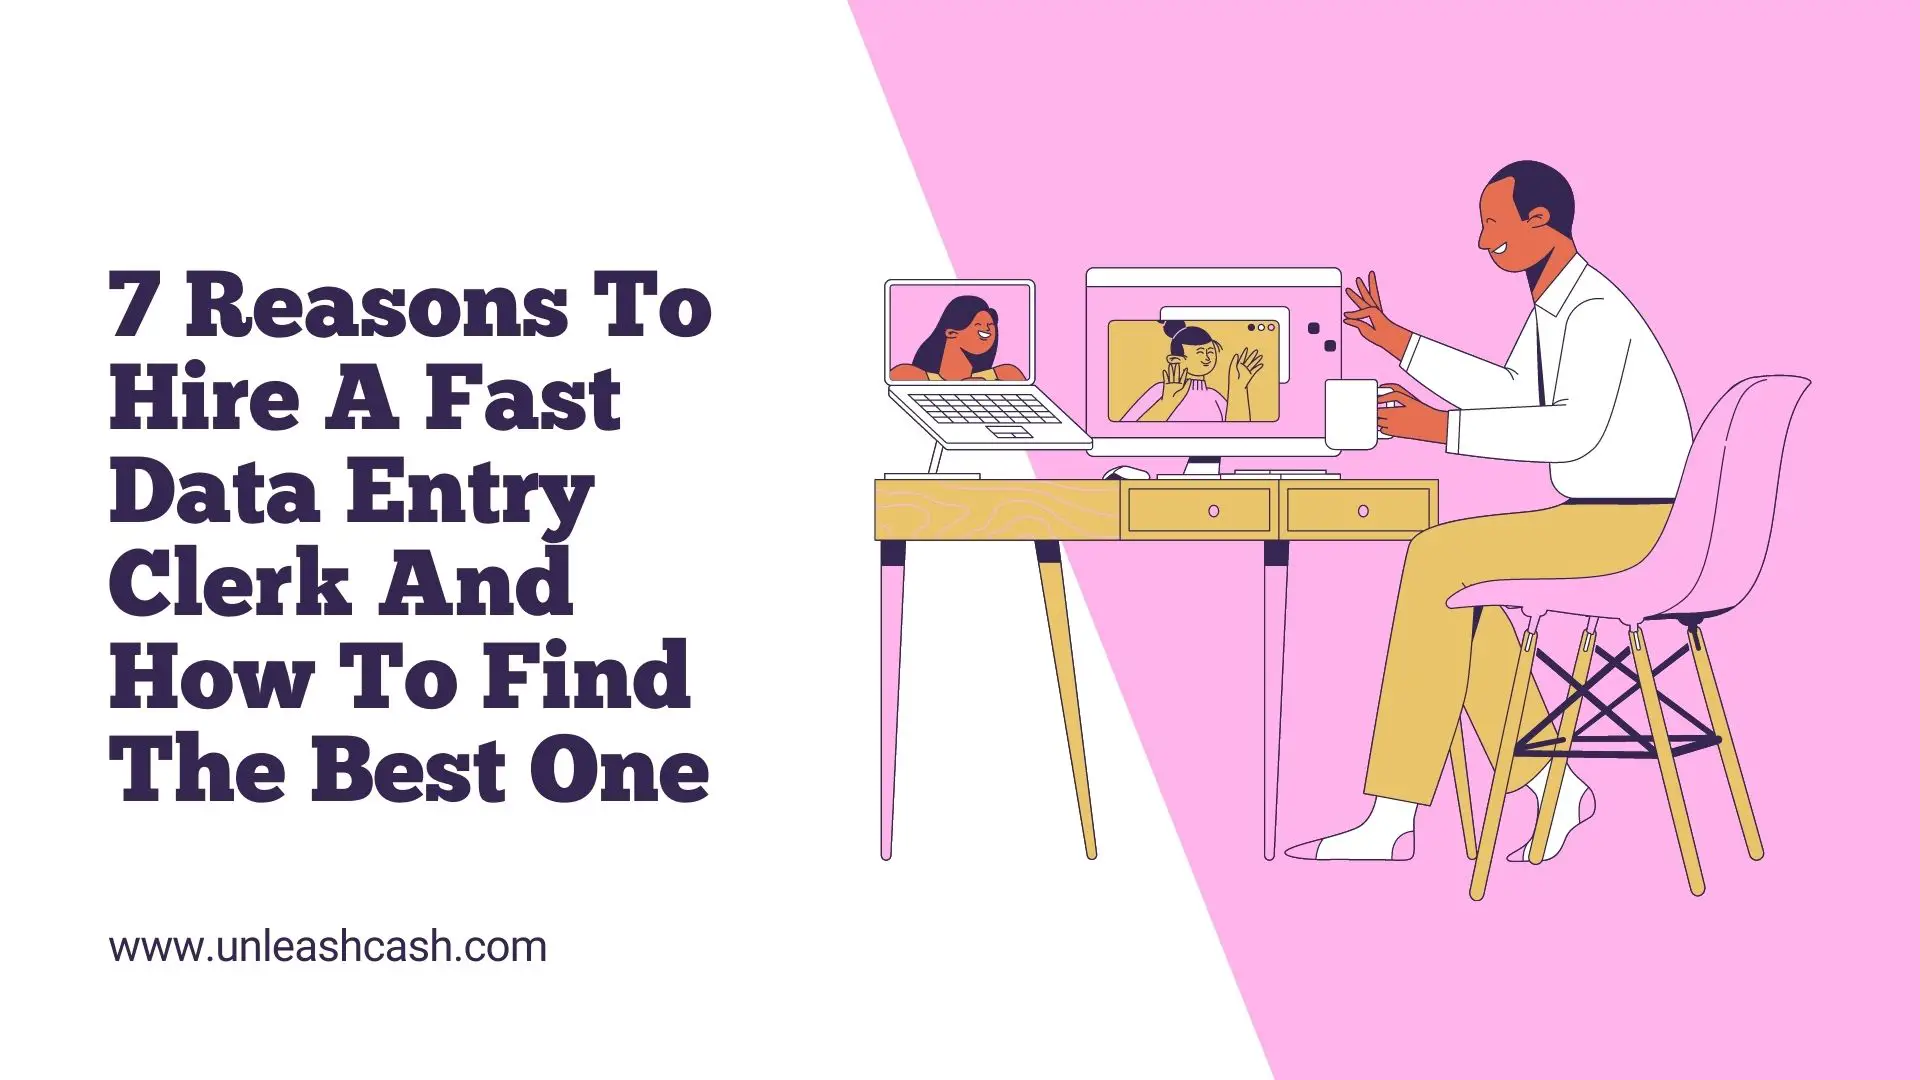 7 Reasons To Hire A Fast Data Entry Clerk And How To Find The Best One